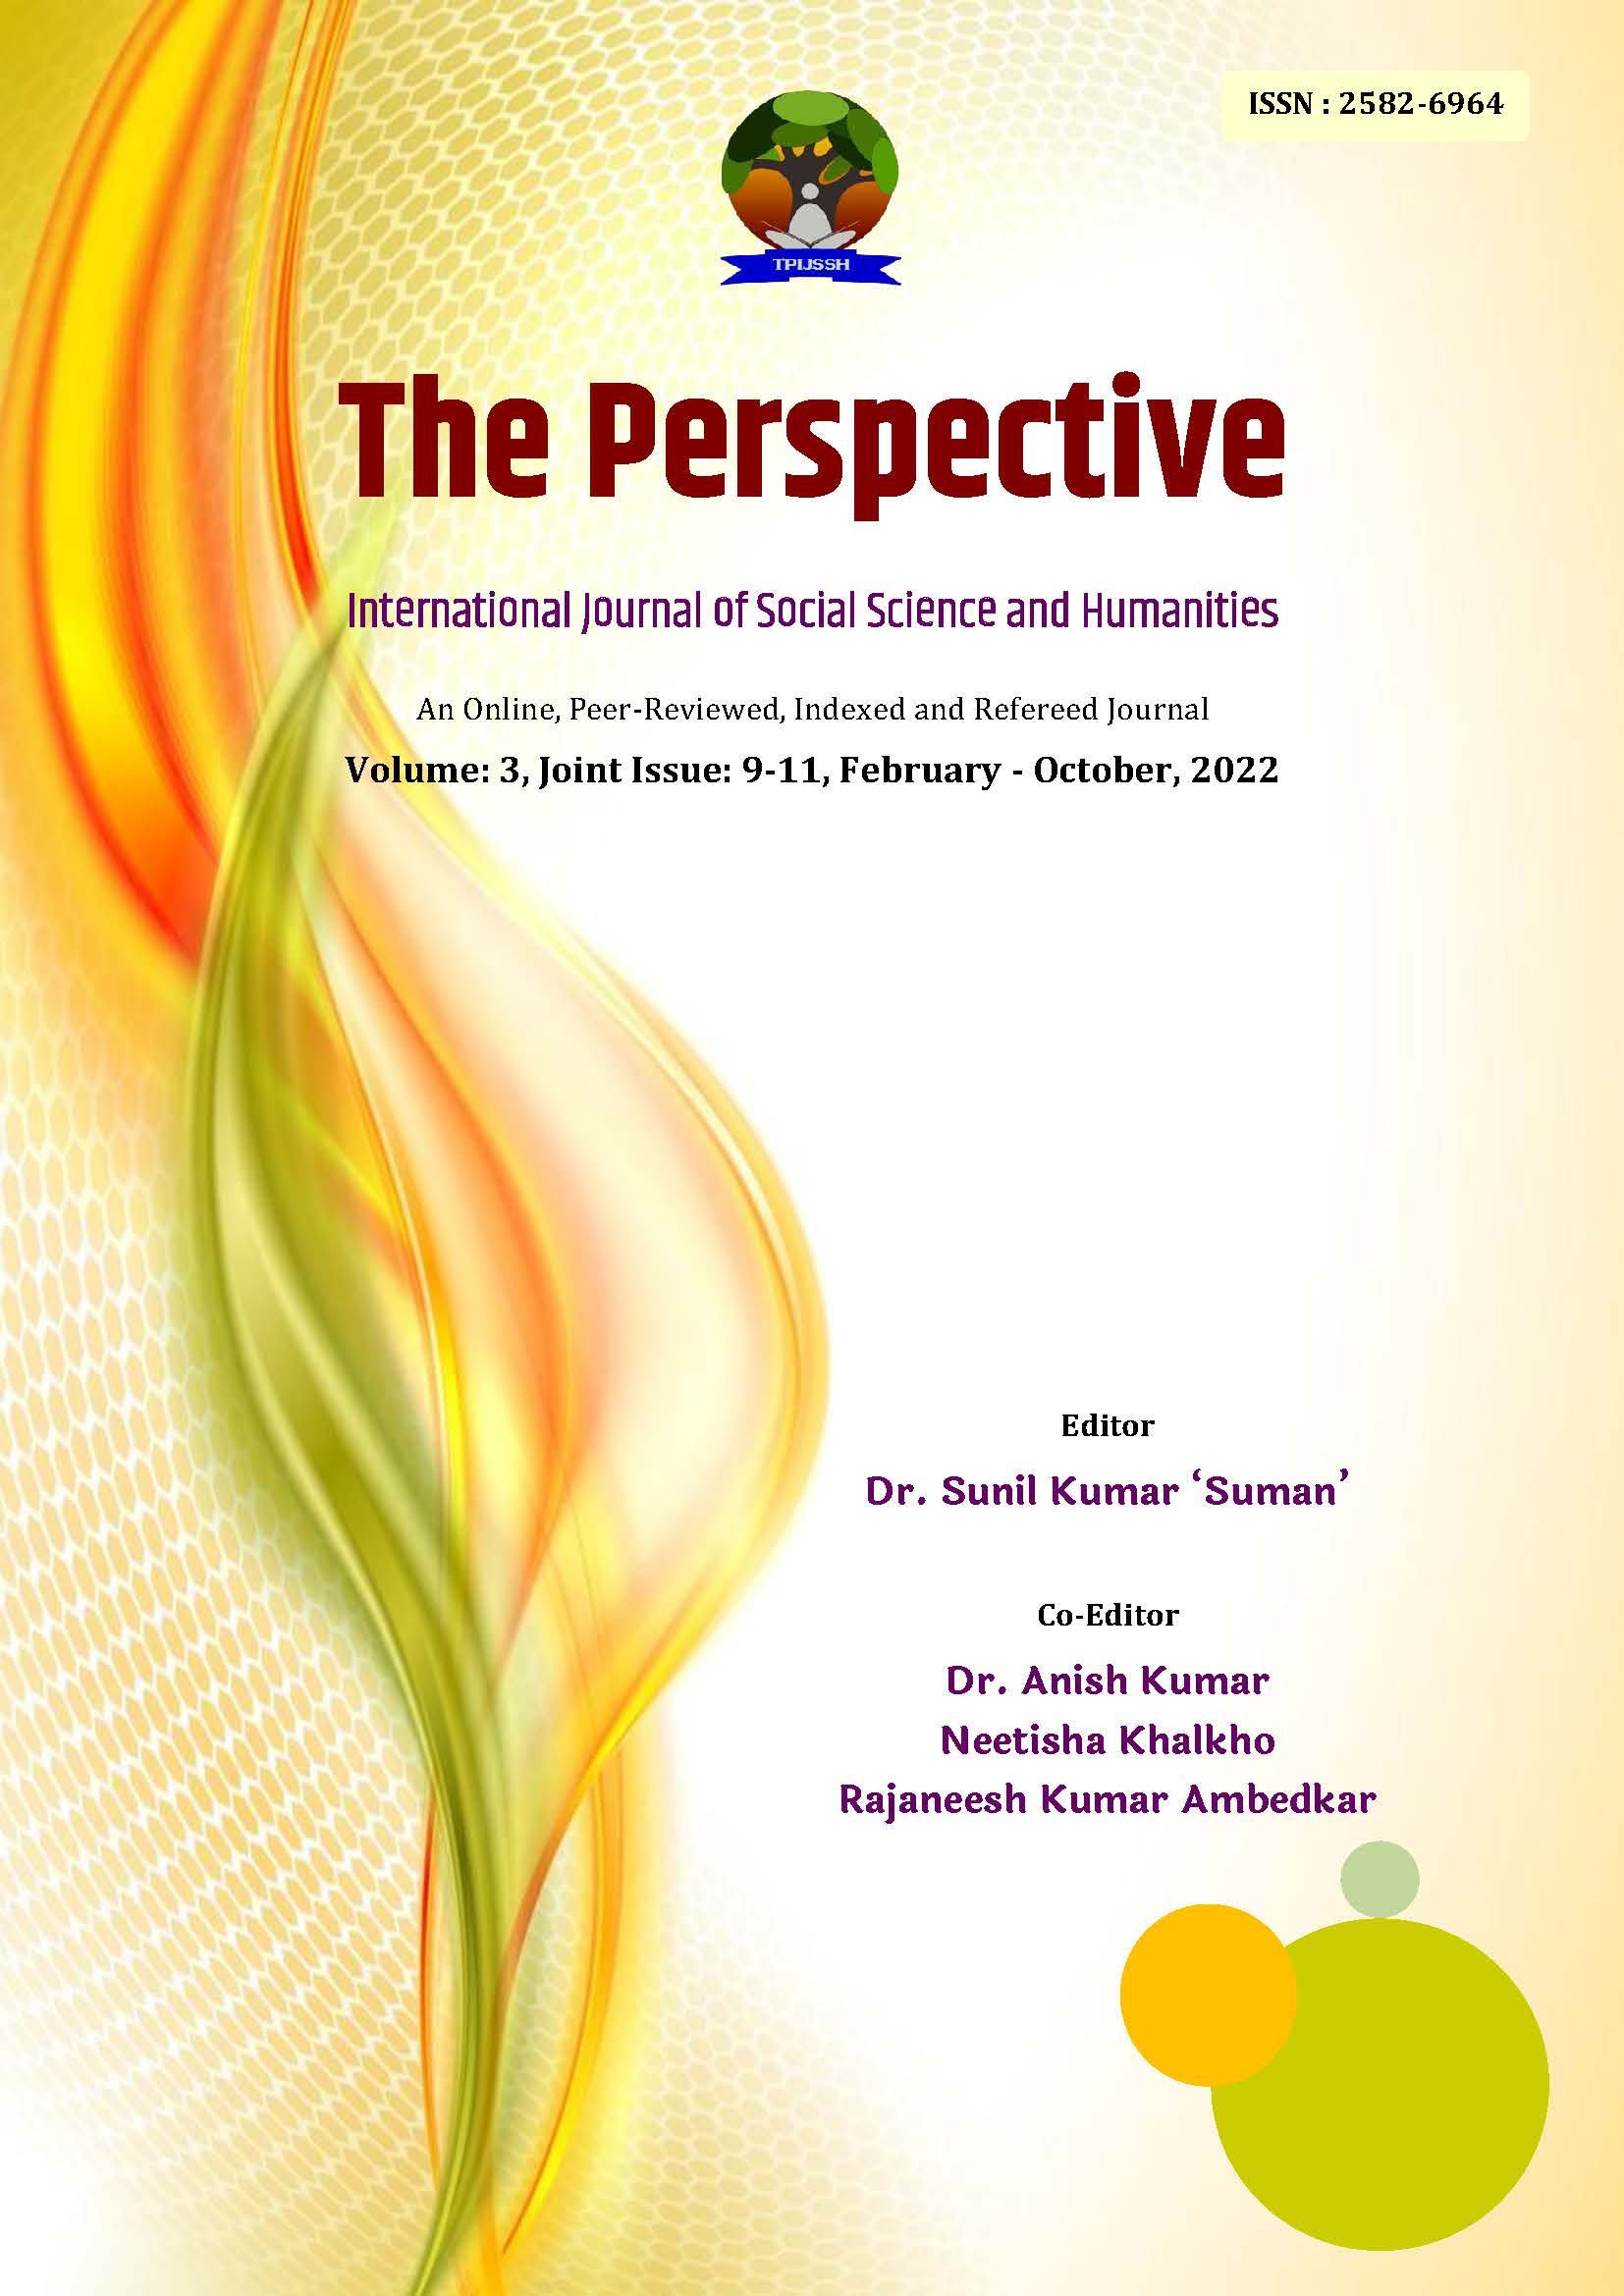 The Perspective International Journal of Social Science and Humanities Issue: 9-11